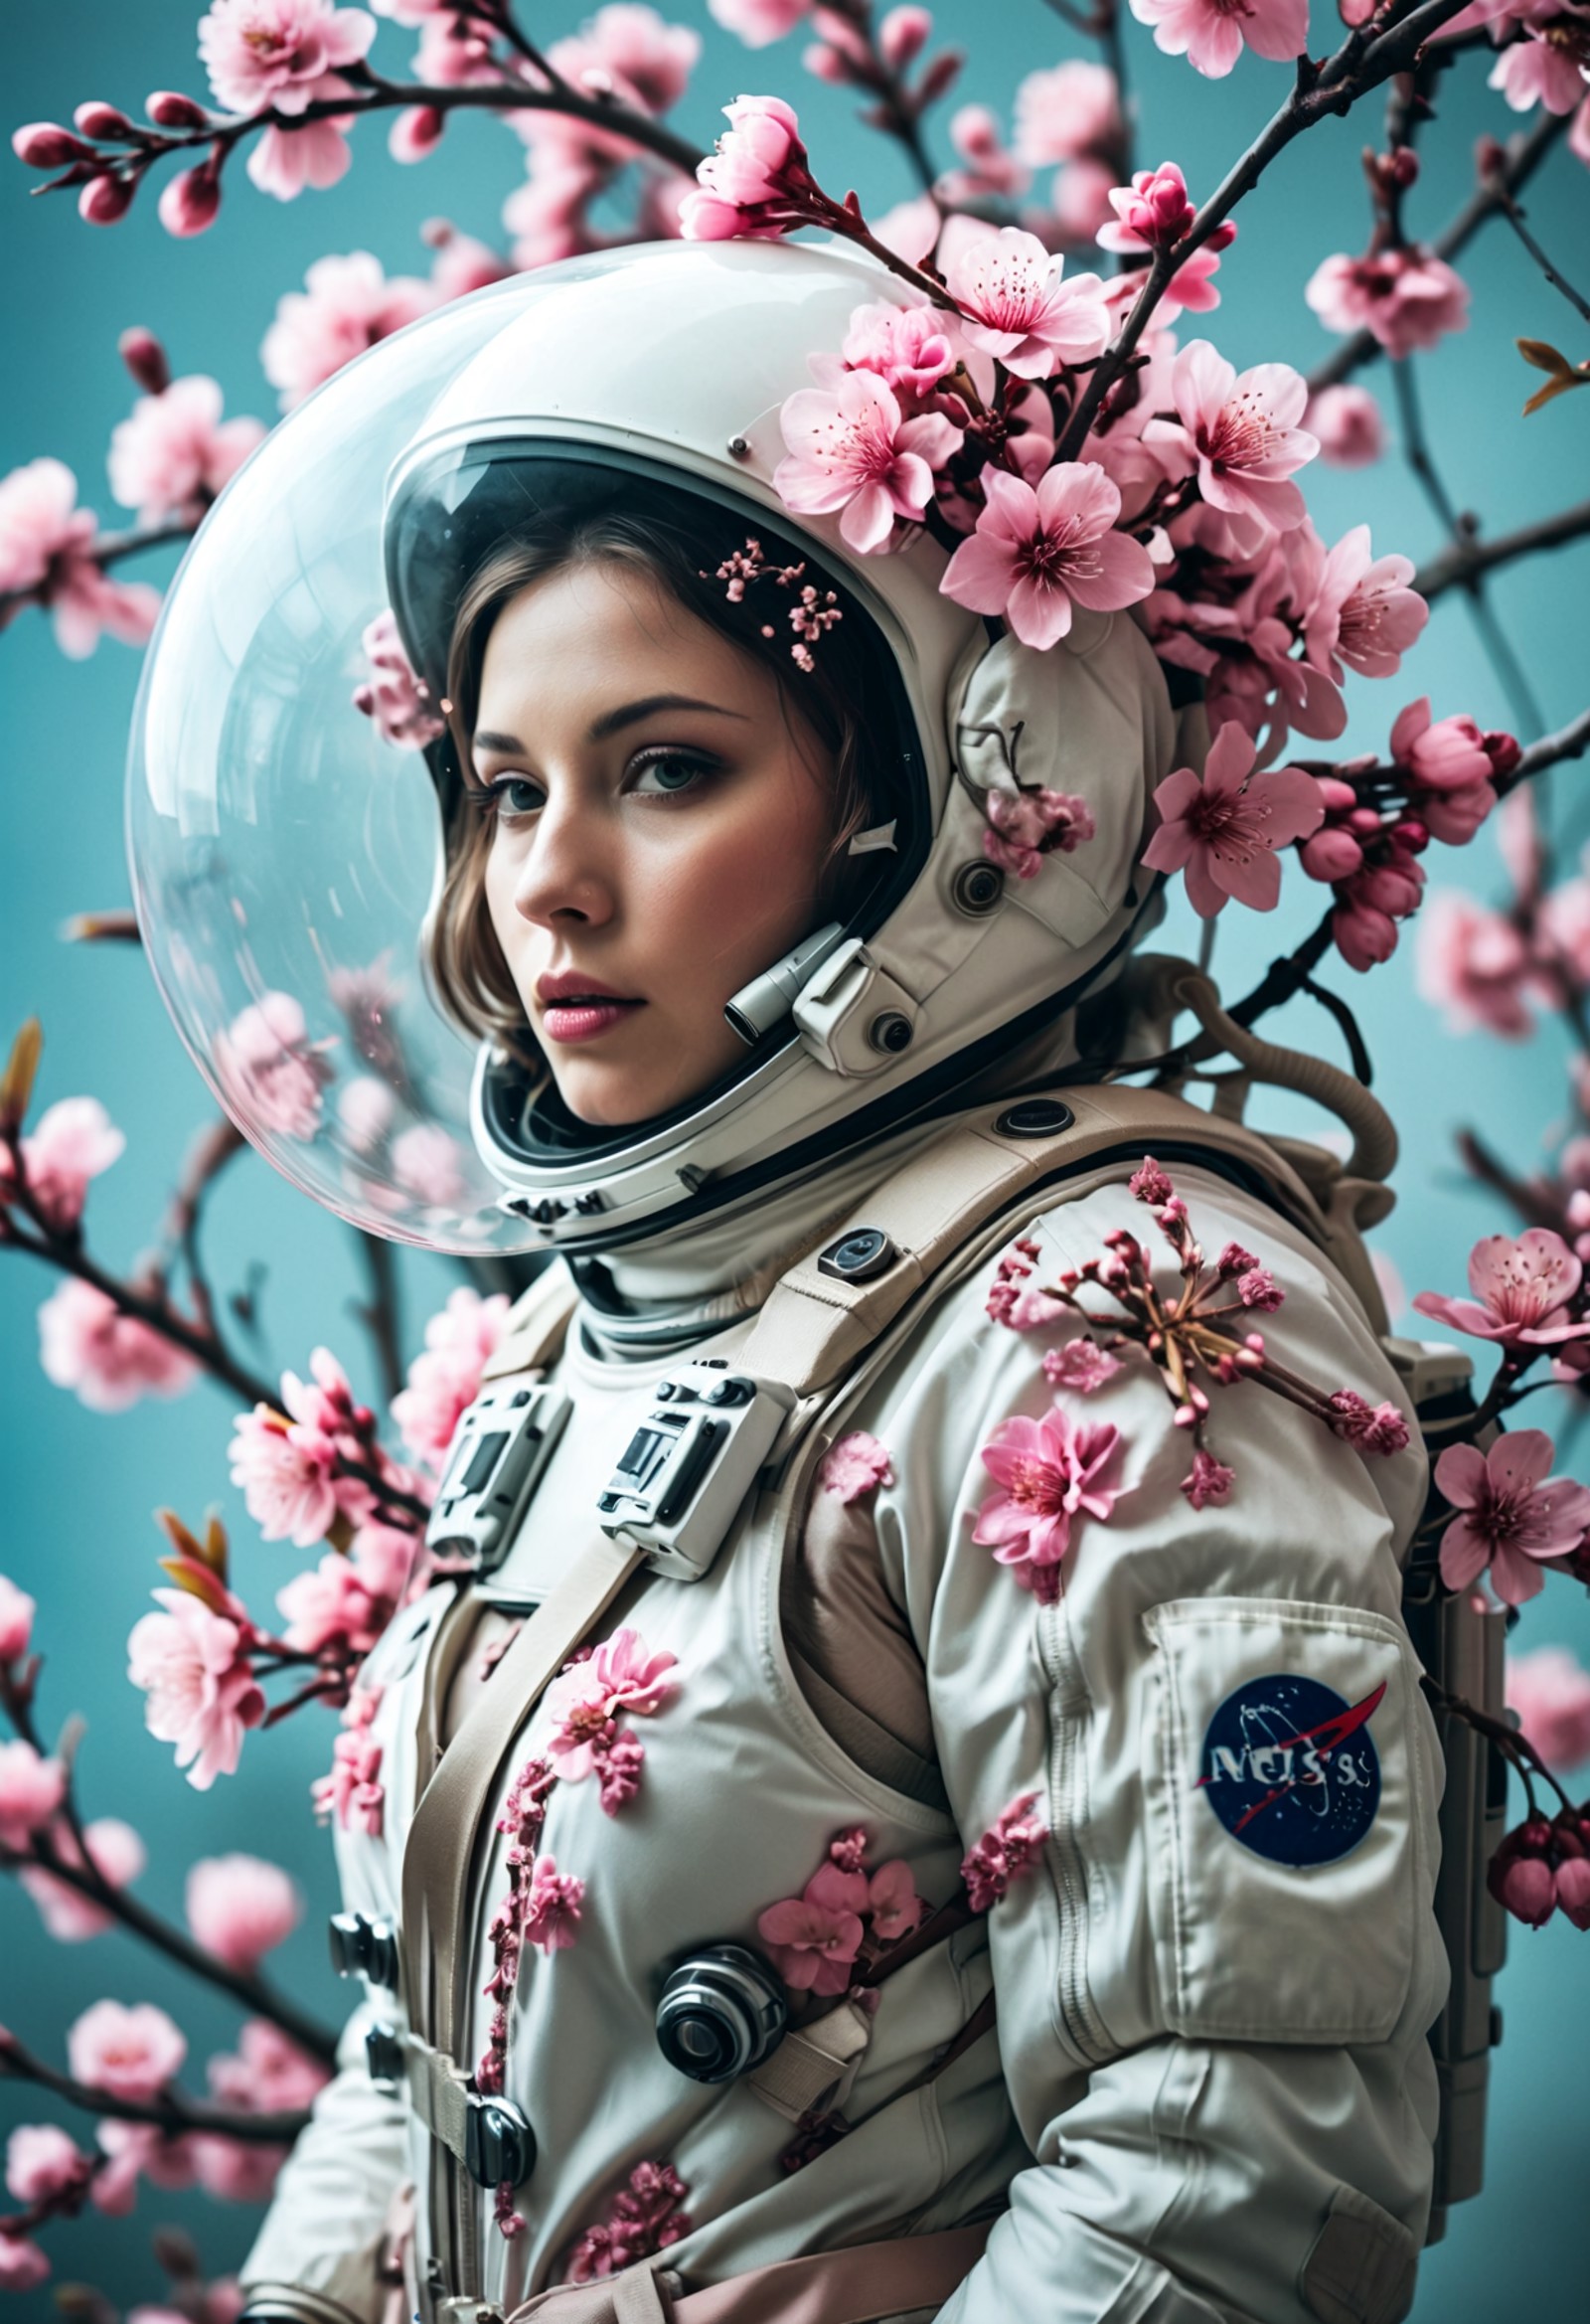 A double exposure photo of a woman astronaut with many pink plum blossoms smoke on her head and shoulders against a light ...